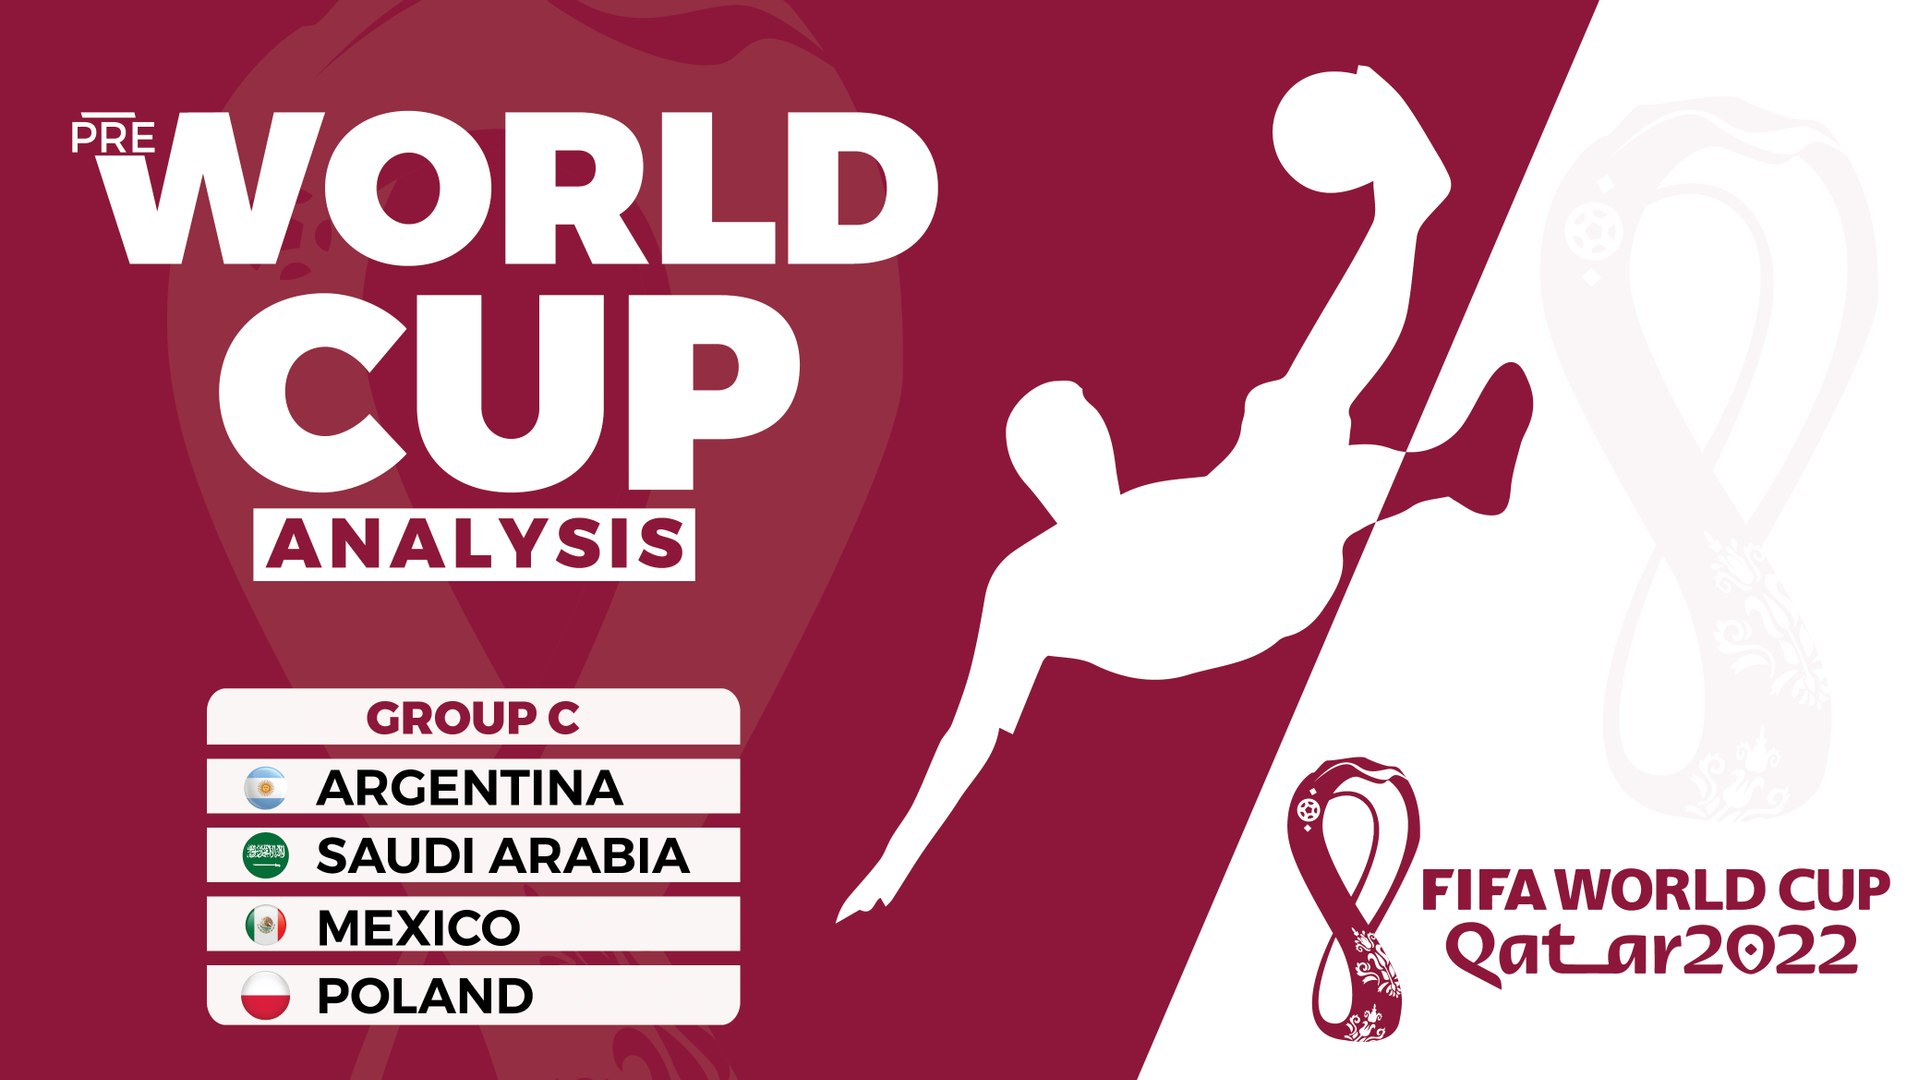 Fifa World Cup Qatar 2022 preview: Group C